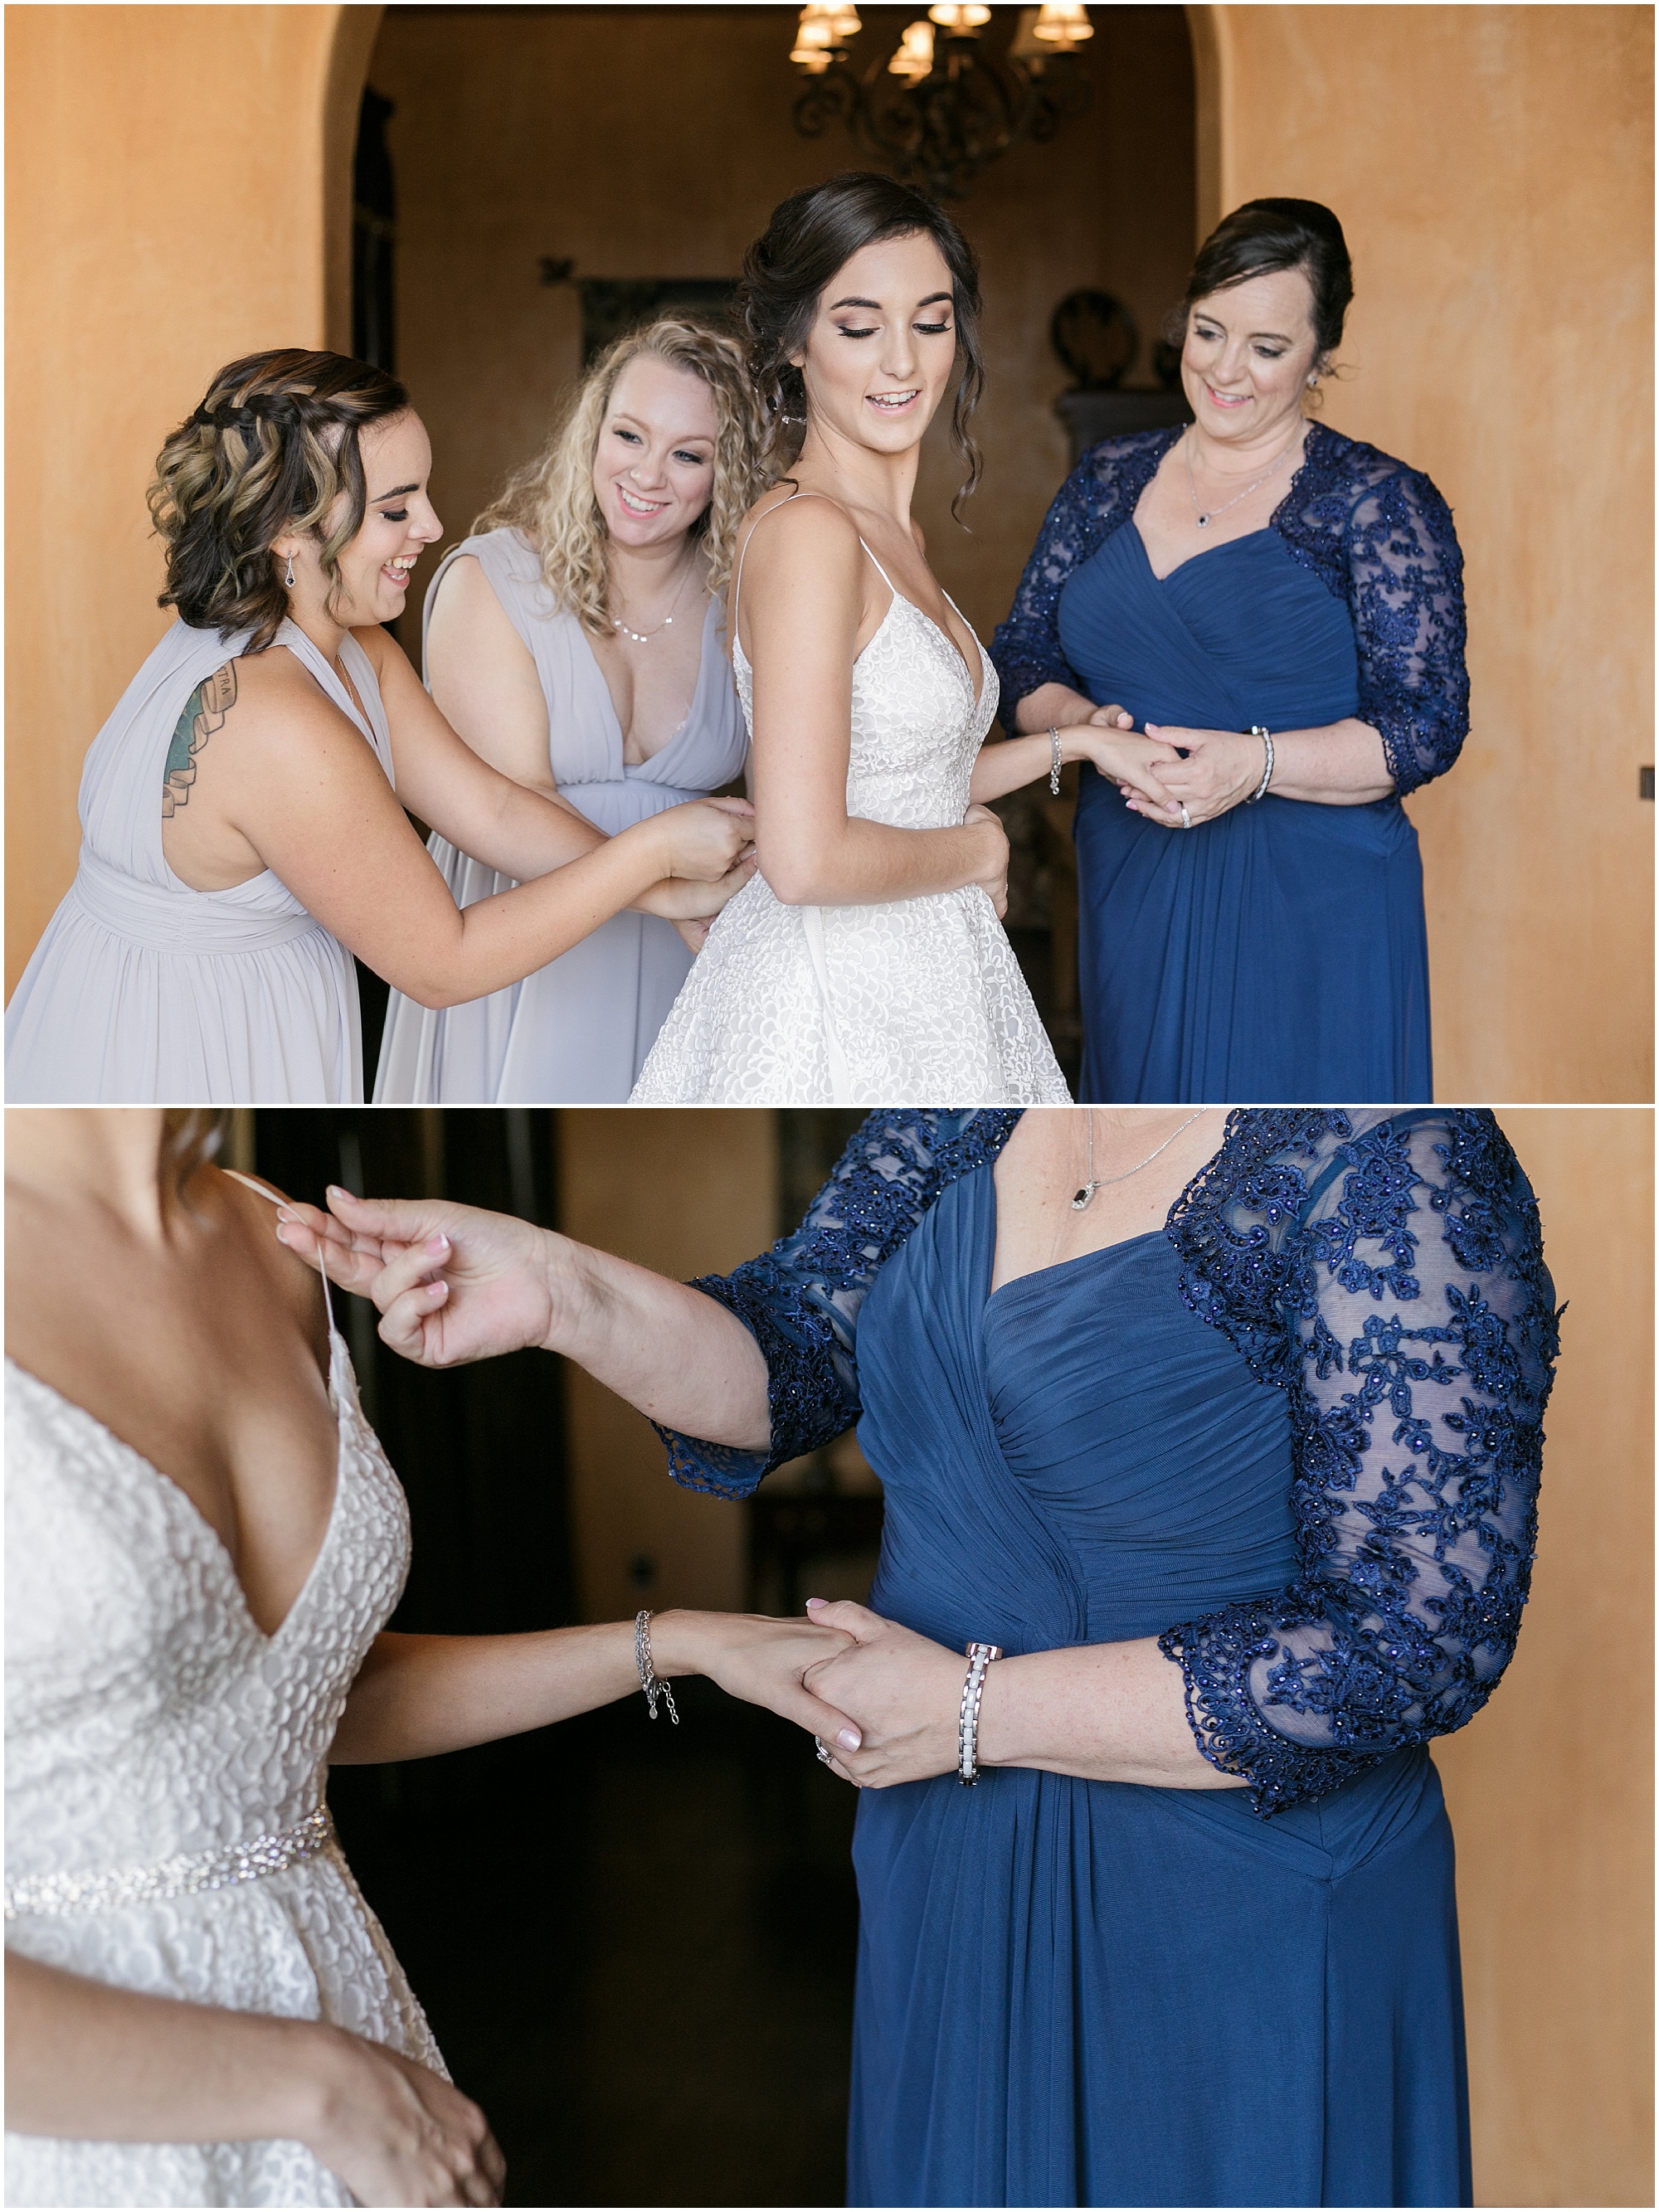 Mother of the bride holding her daughters hand while she gets her dress on.